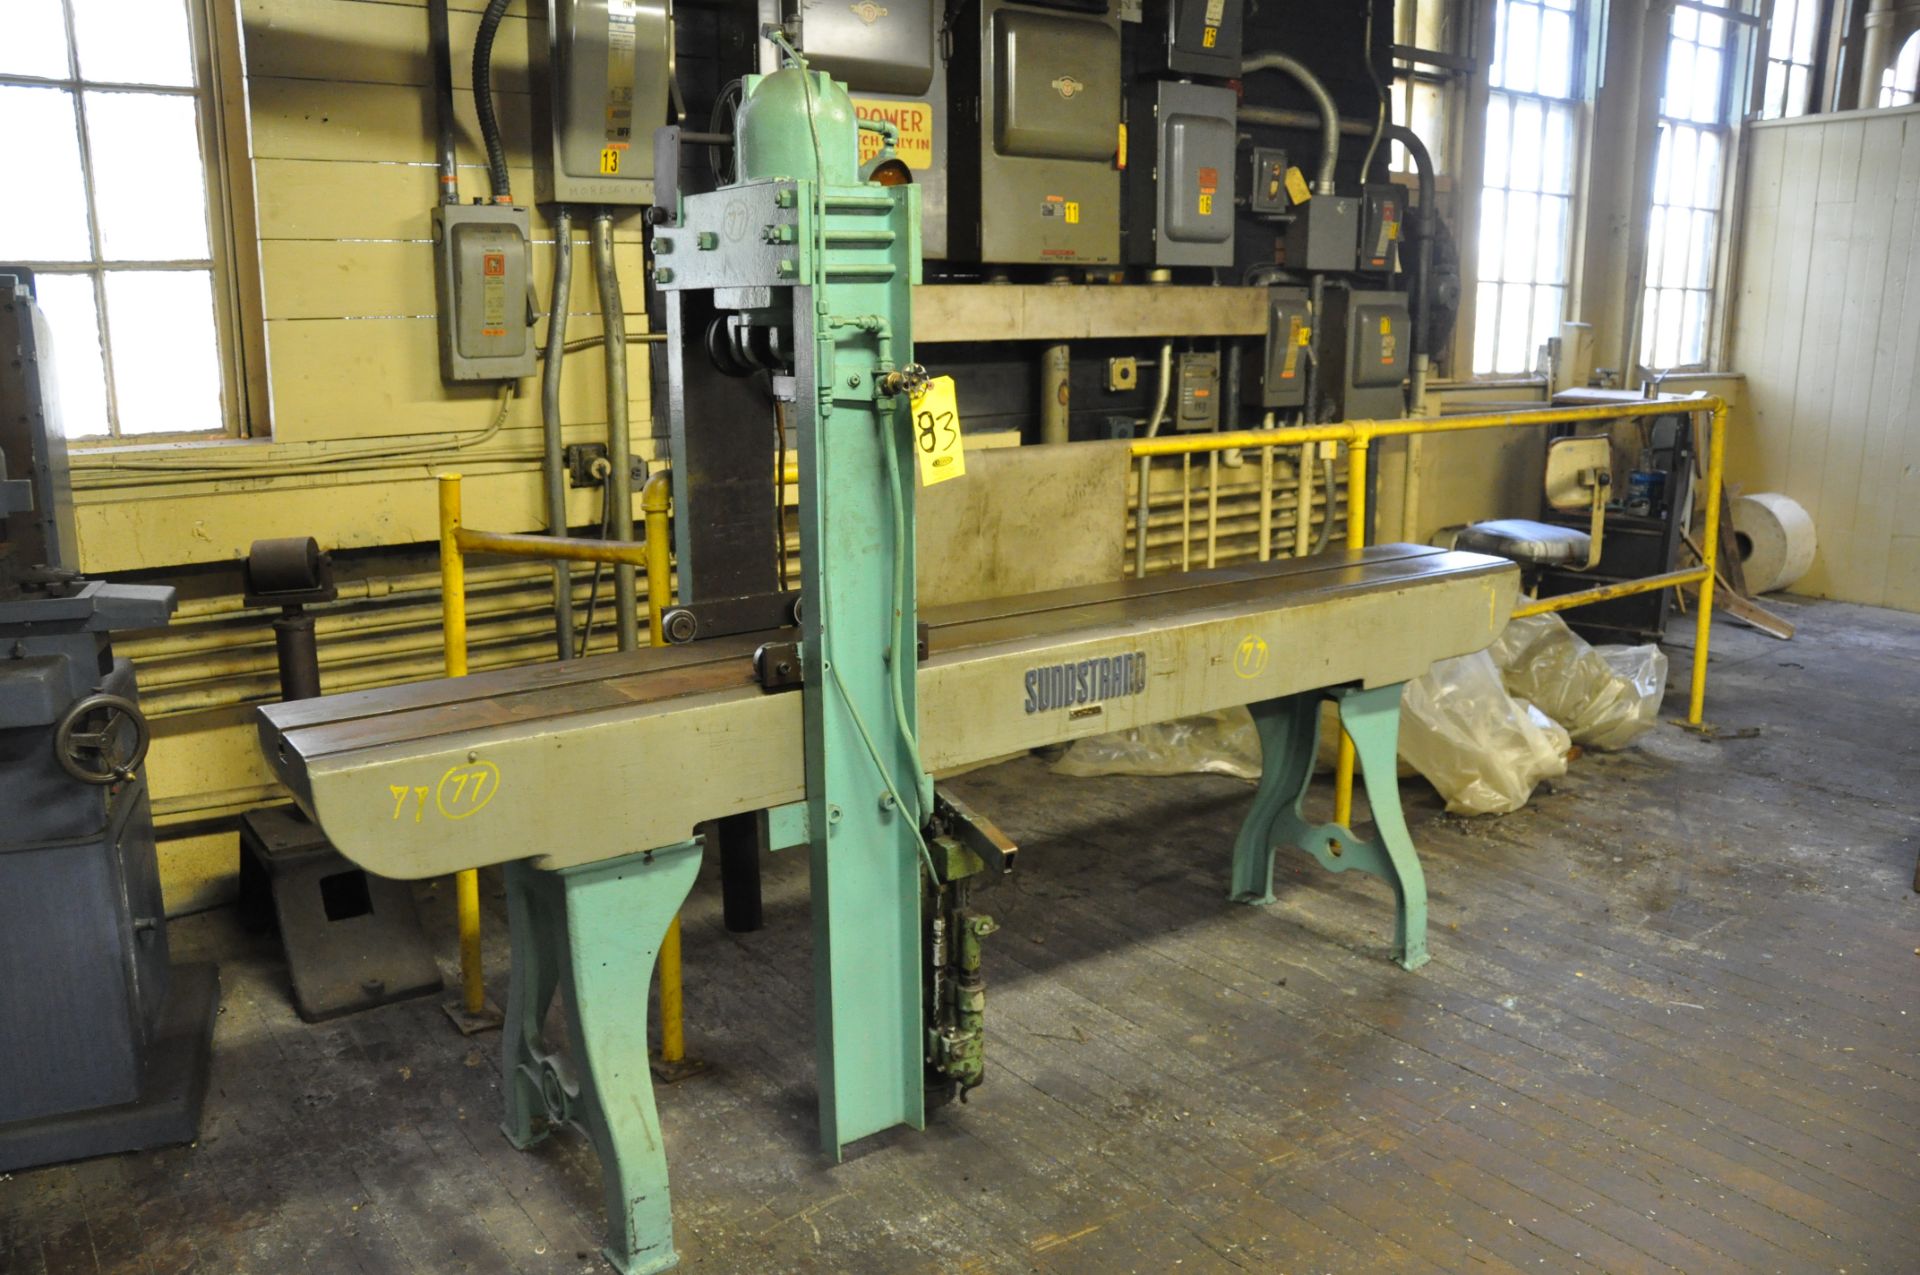 SUNSTRAND STRAIGHTENING PRESS, S/N 78-4257, BED SIZE 12-1/2" X 106" WITH 1 T SLOT…